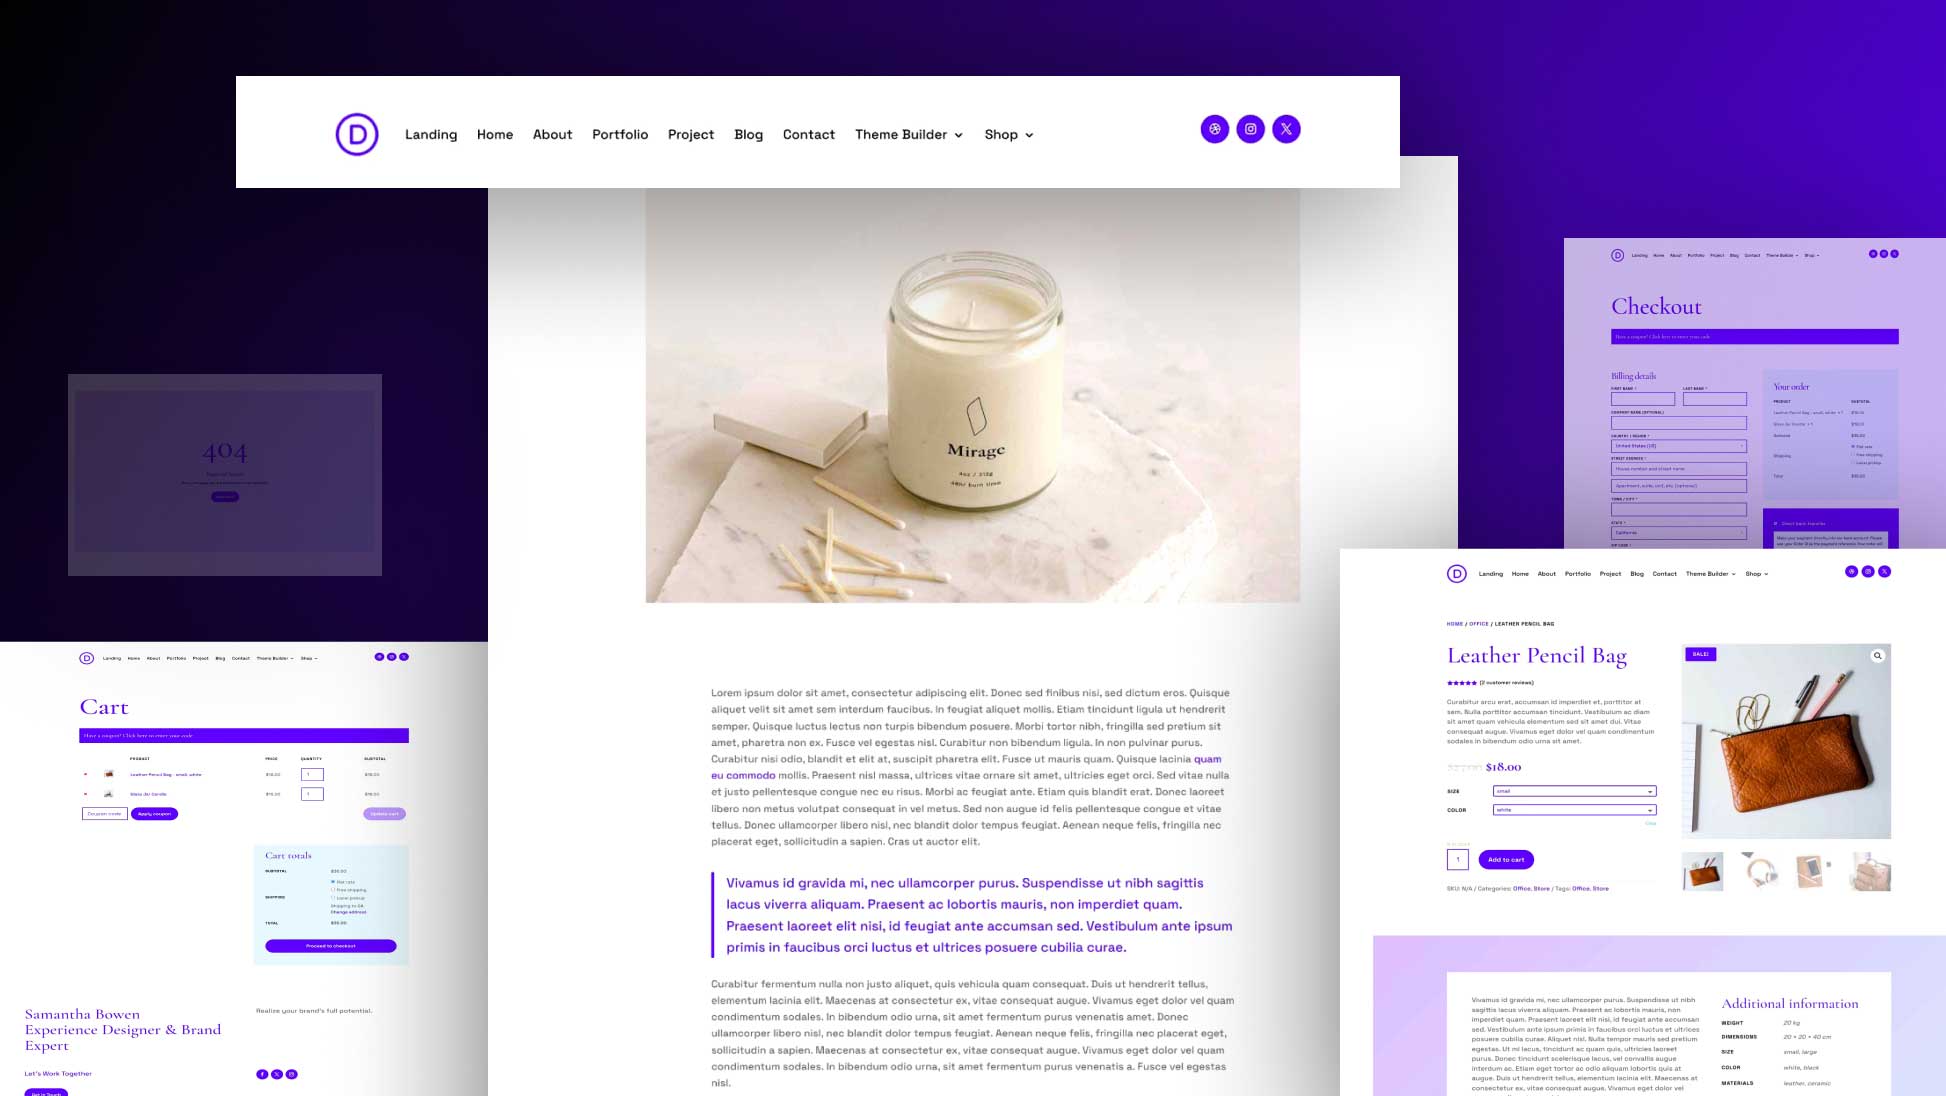 Download a Free Creative Director Theme Builder Pack for Divi